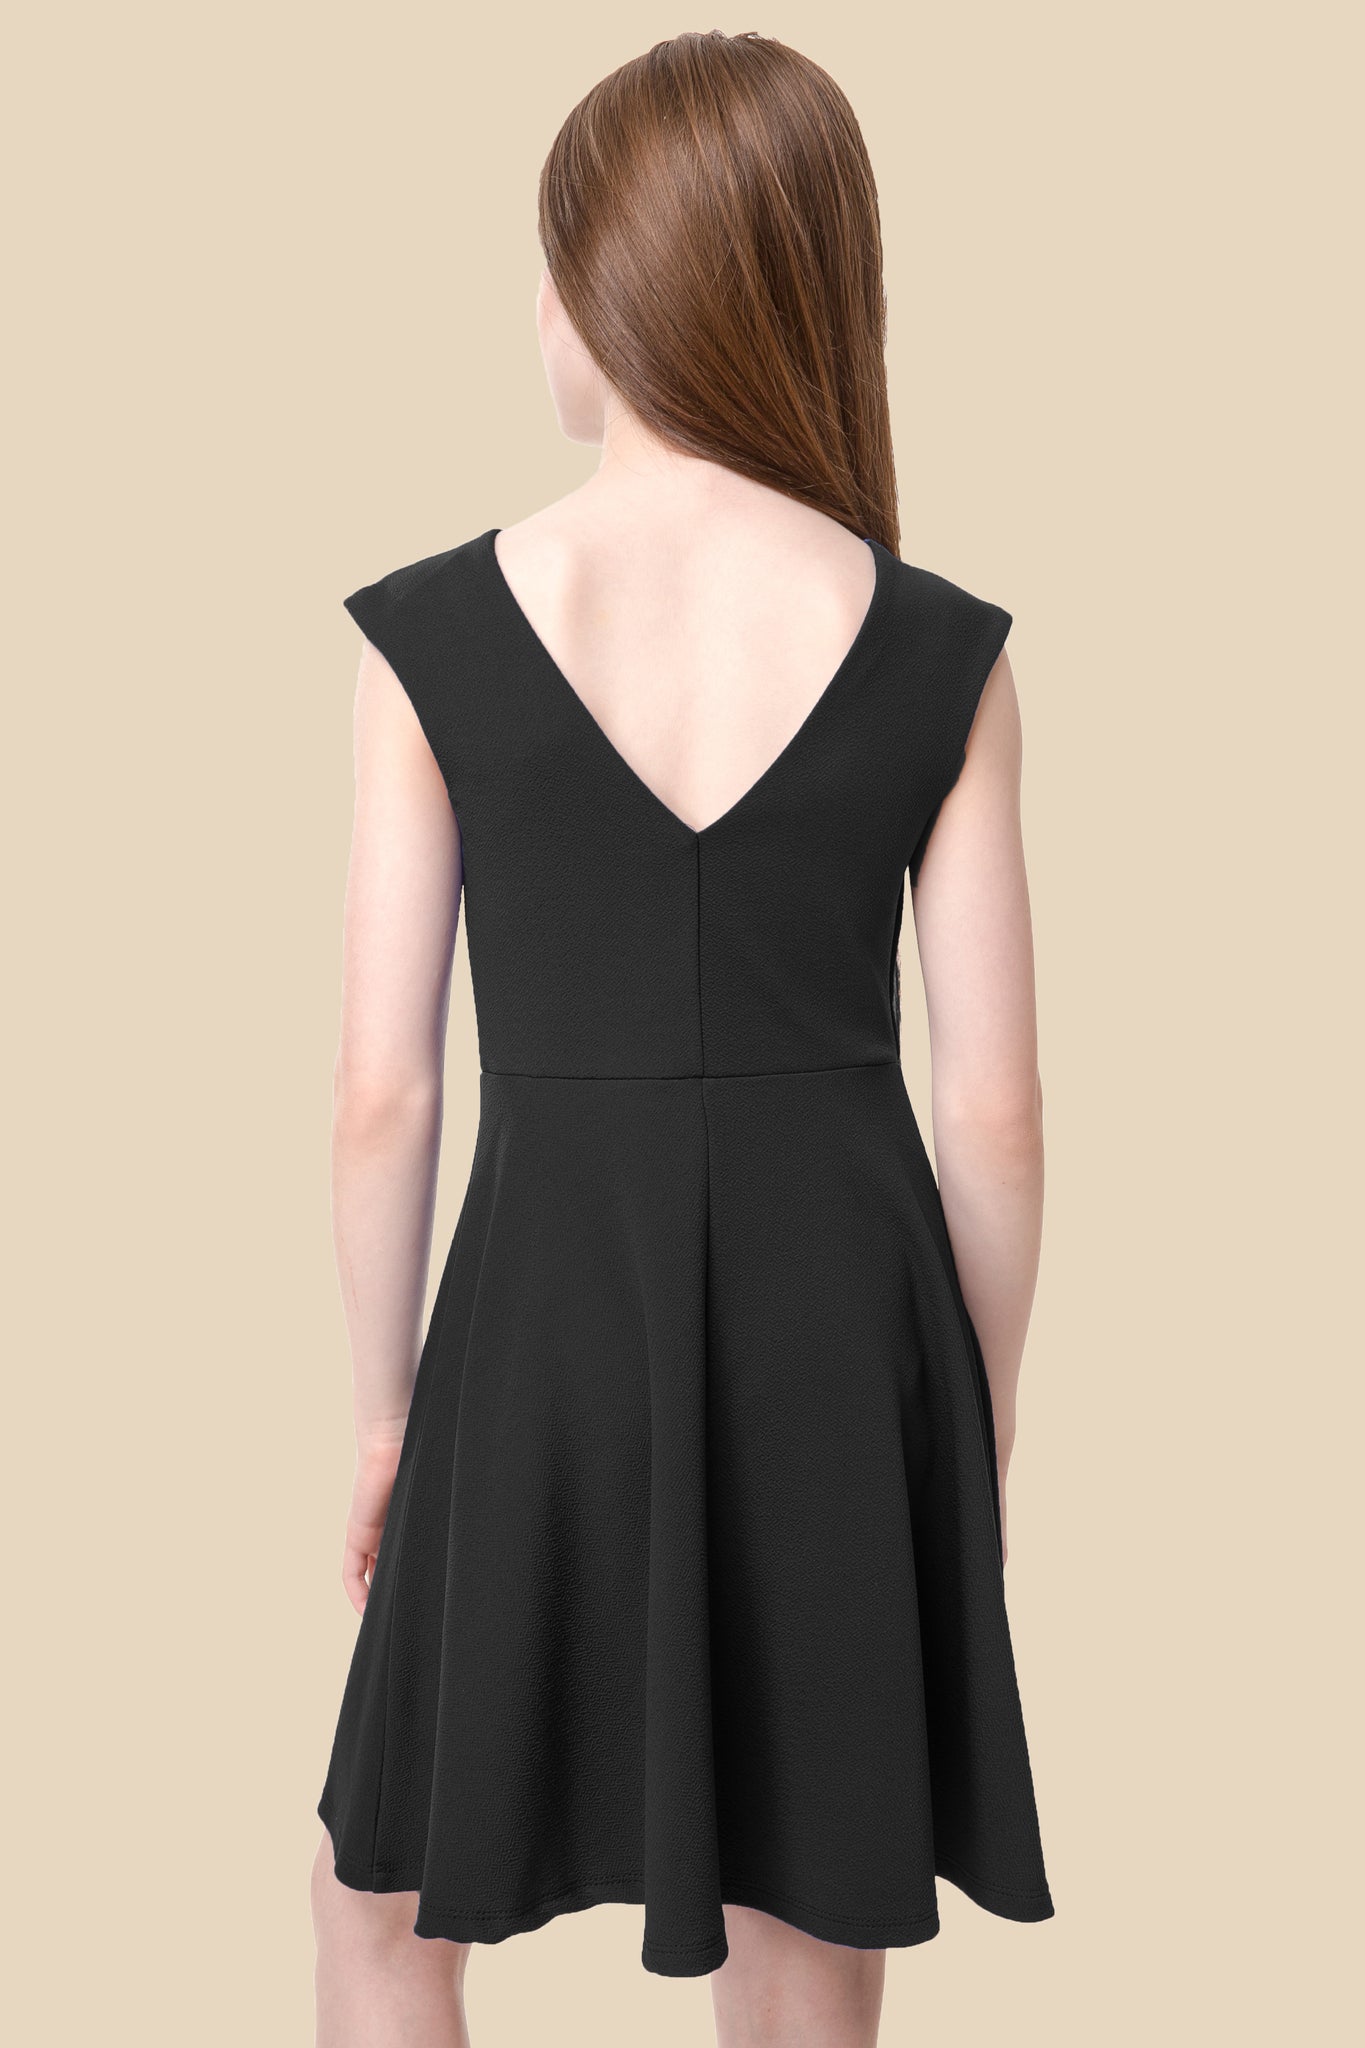 fit and flare black dress